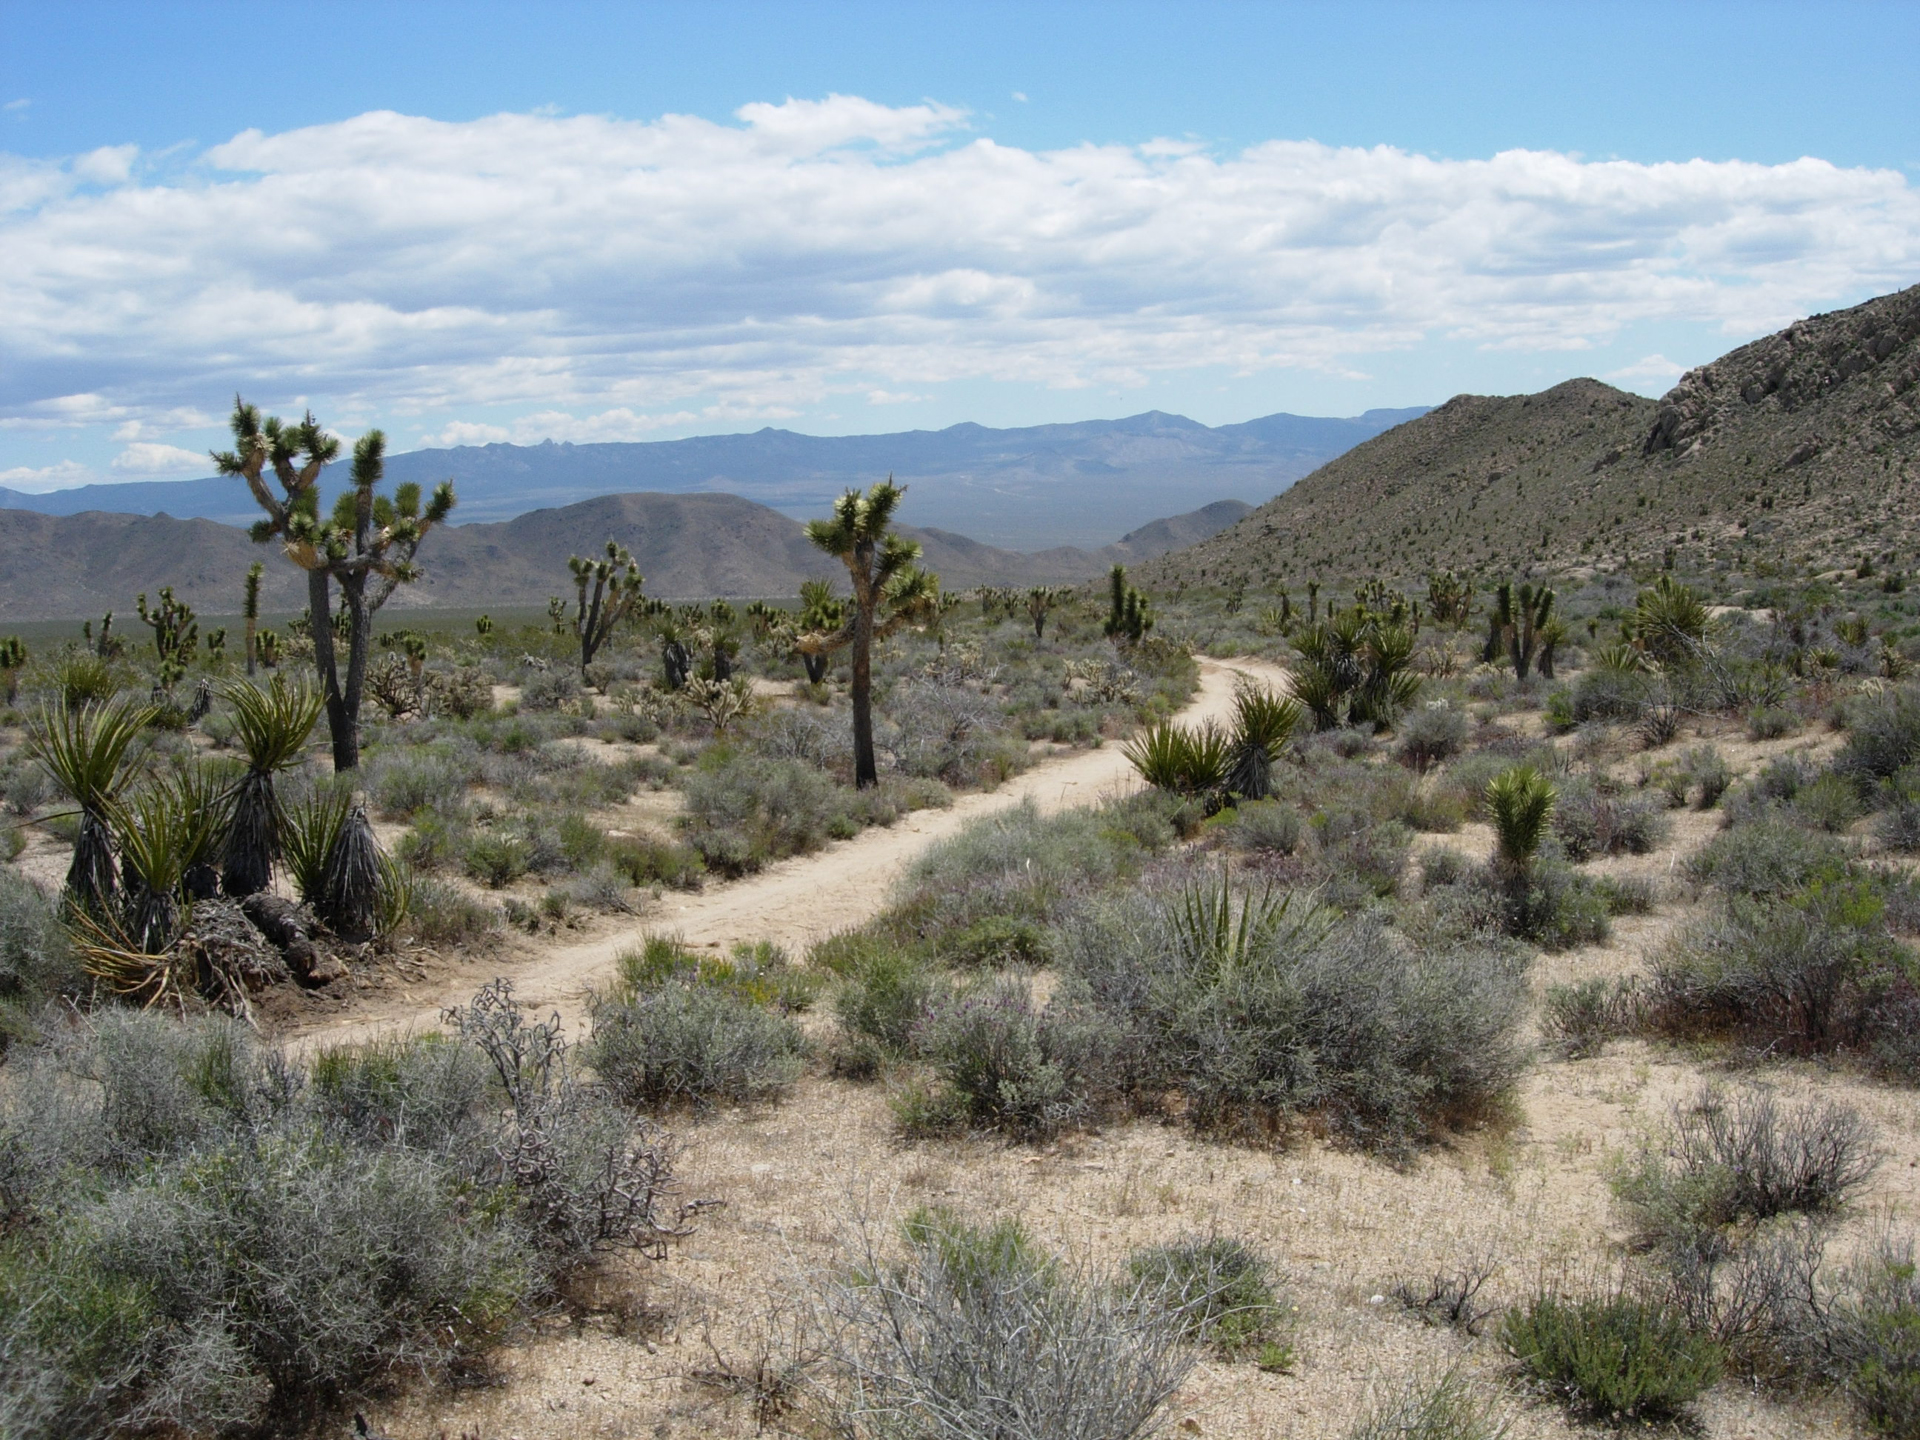 trail through desert scrub with Joshua trees, mountains in the distance, puffy clouds